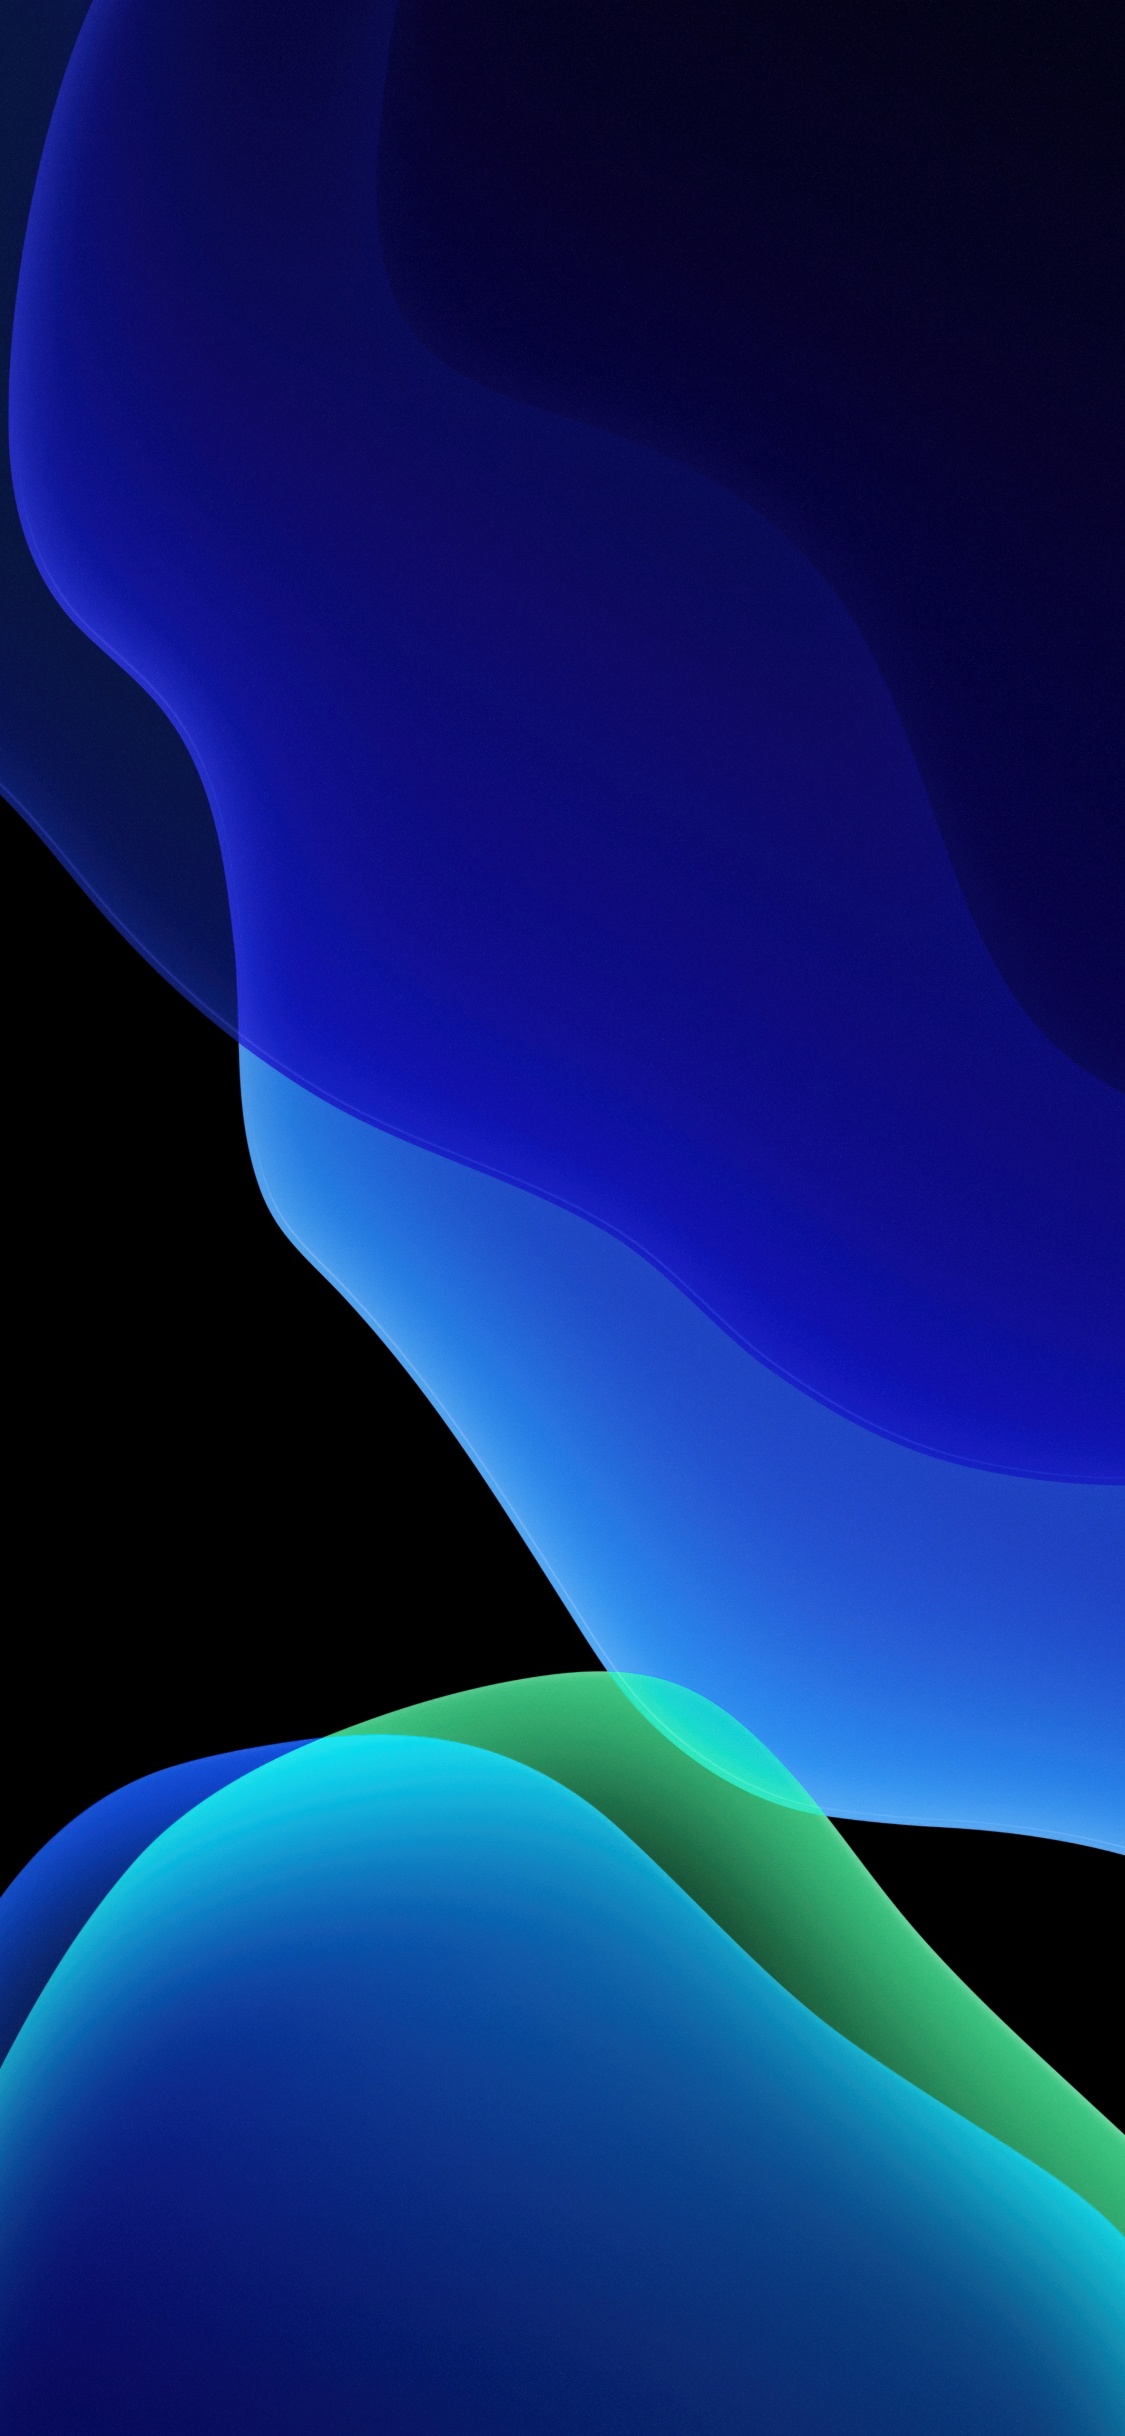 Download Get Ready to Upgrade with a Black and Blue iPhone Wallpaper   Wallpaperscom